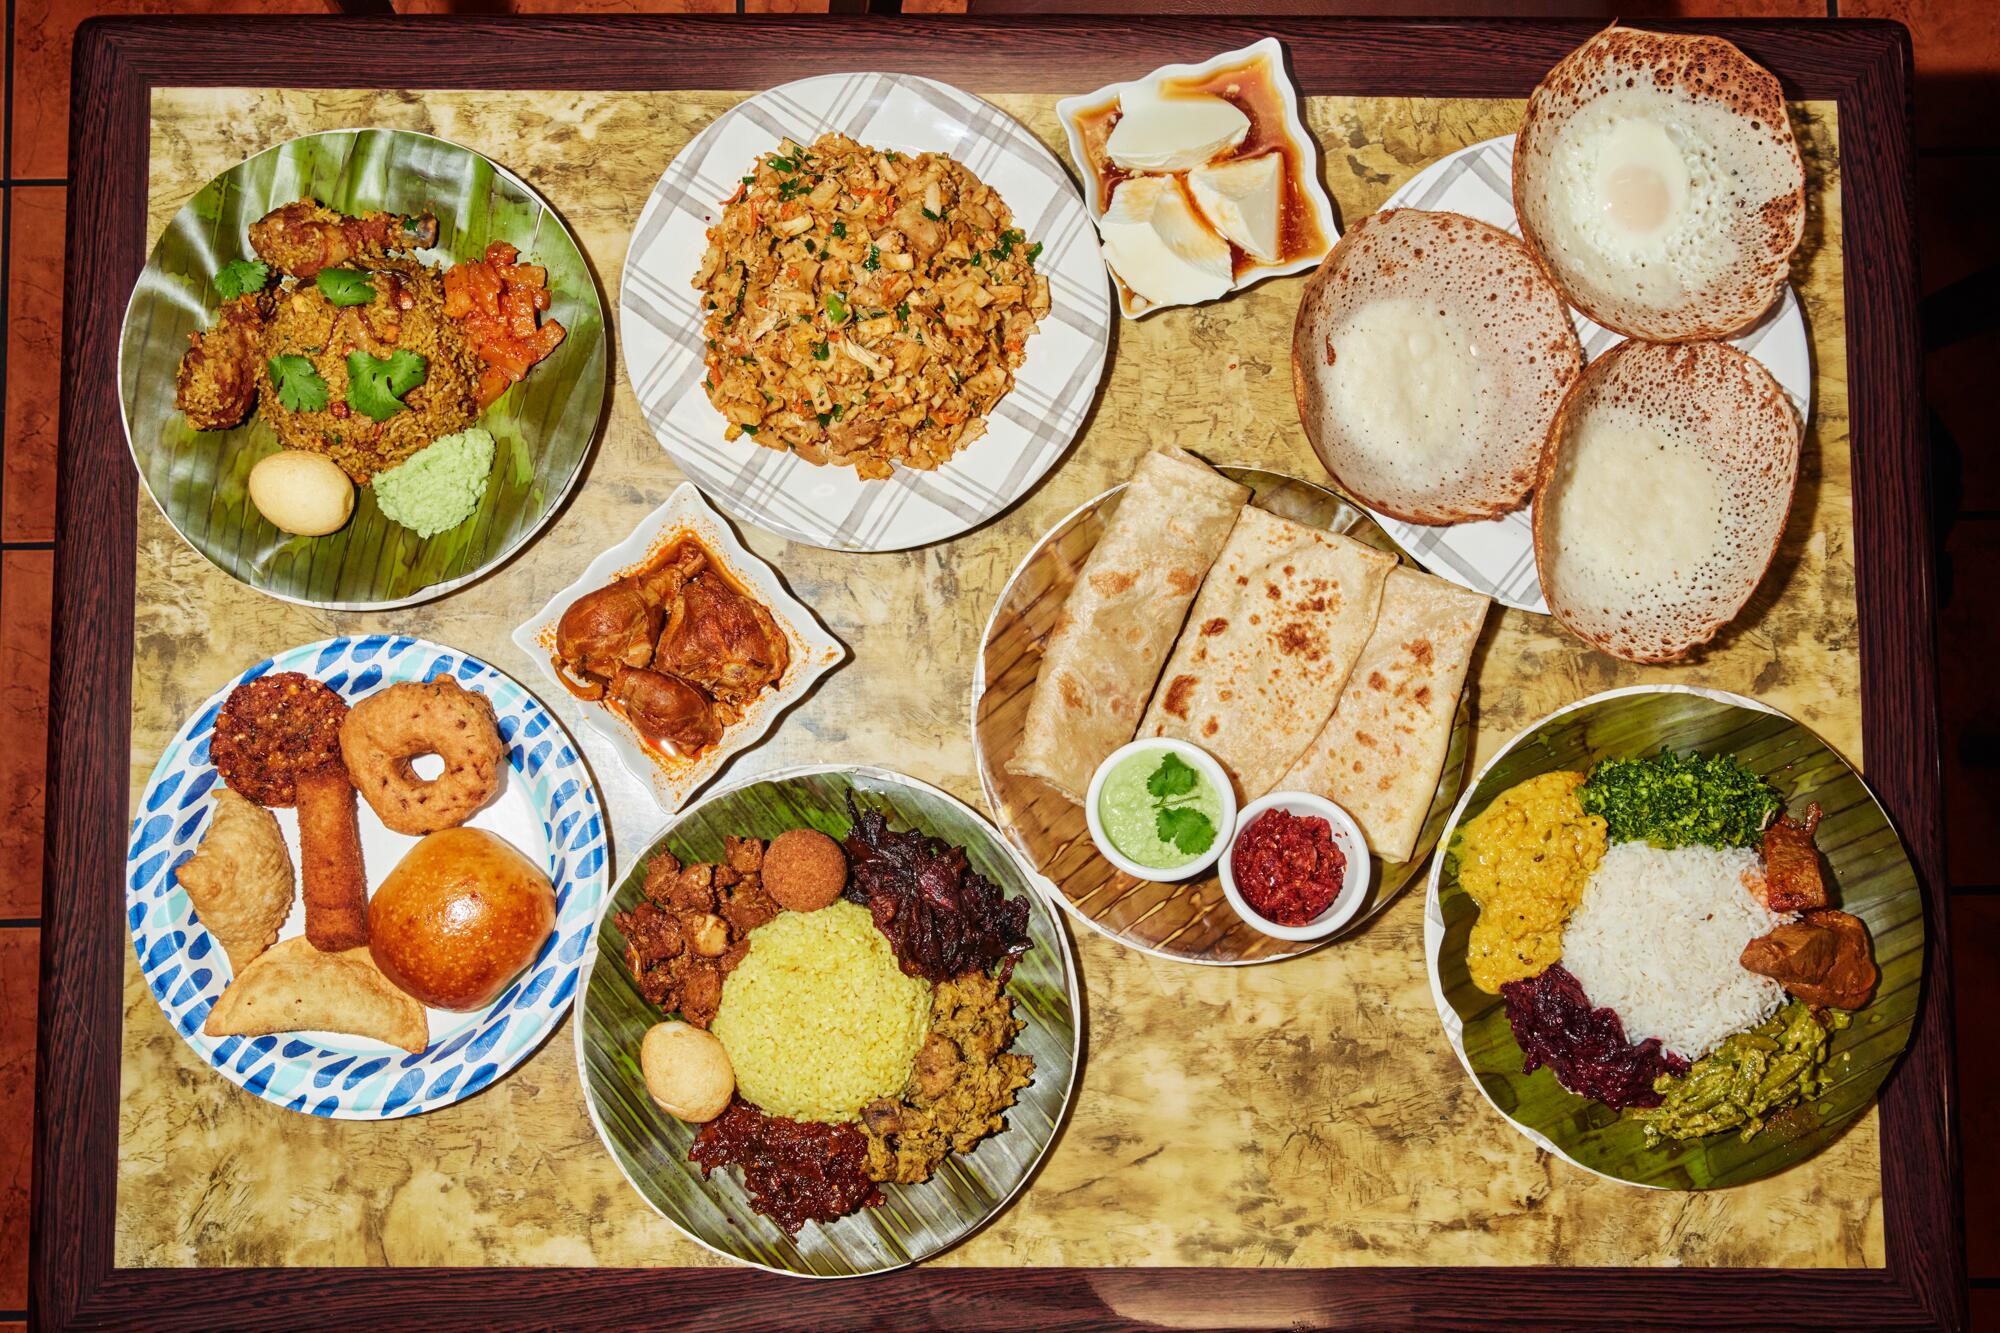 A selection of Sri Lankan dishes from Baja Sub